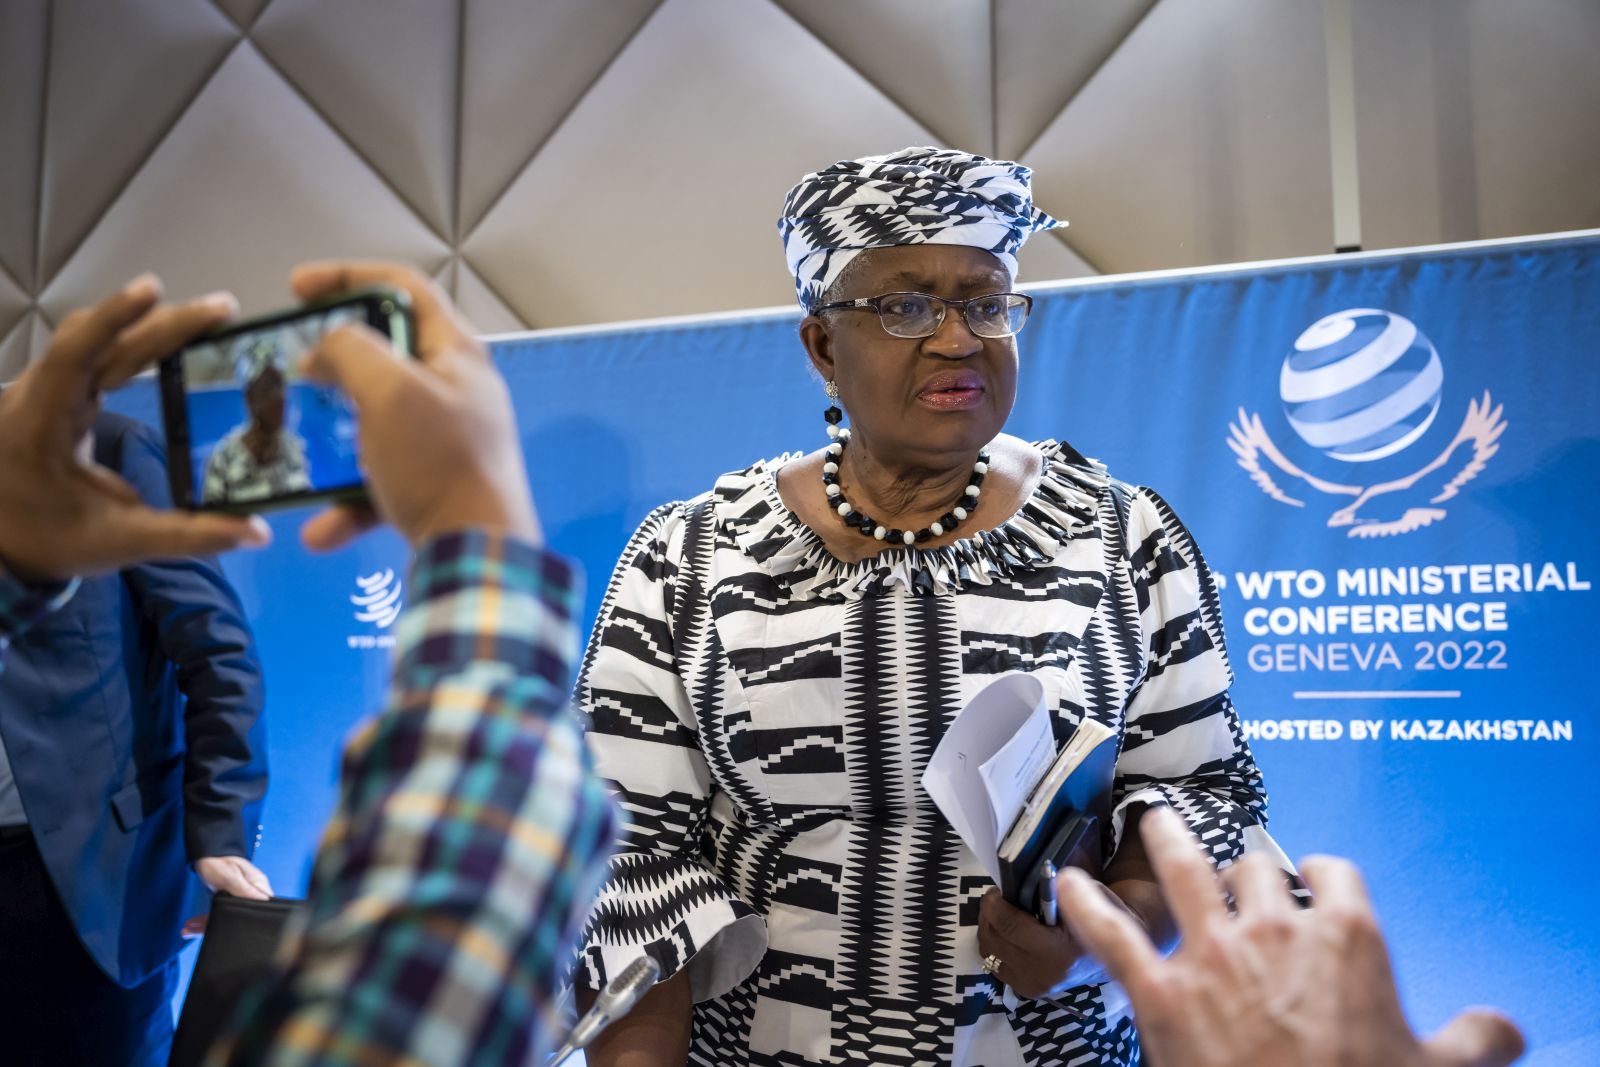 epa10009376 Nigeria's Ngozi Okonjo-Iweala, Director General of the World Trade Organisation (WTO) speaks at a press conference before the opening of the 12th Ministerial Conference (MC12) taking place from June 12-15, in Geneva, at the headquarters of the World Trade Organization (WTO), in Geneva, Switzerland, 12 June 2022.  EPA/MARTIAL TREZZINI